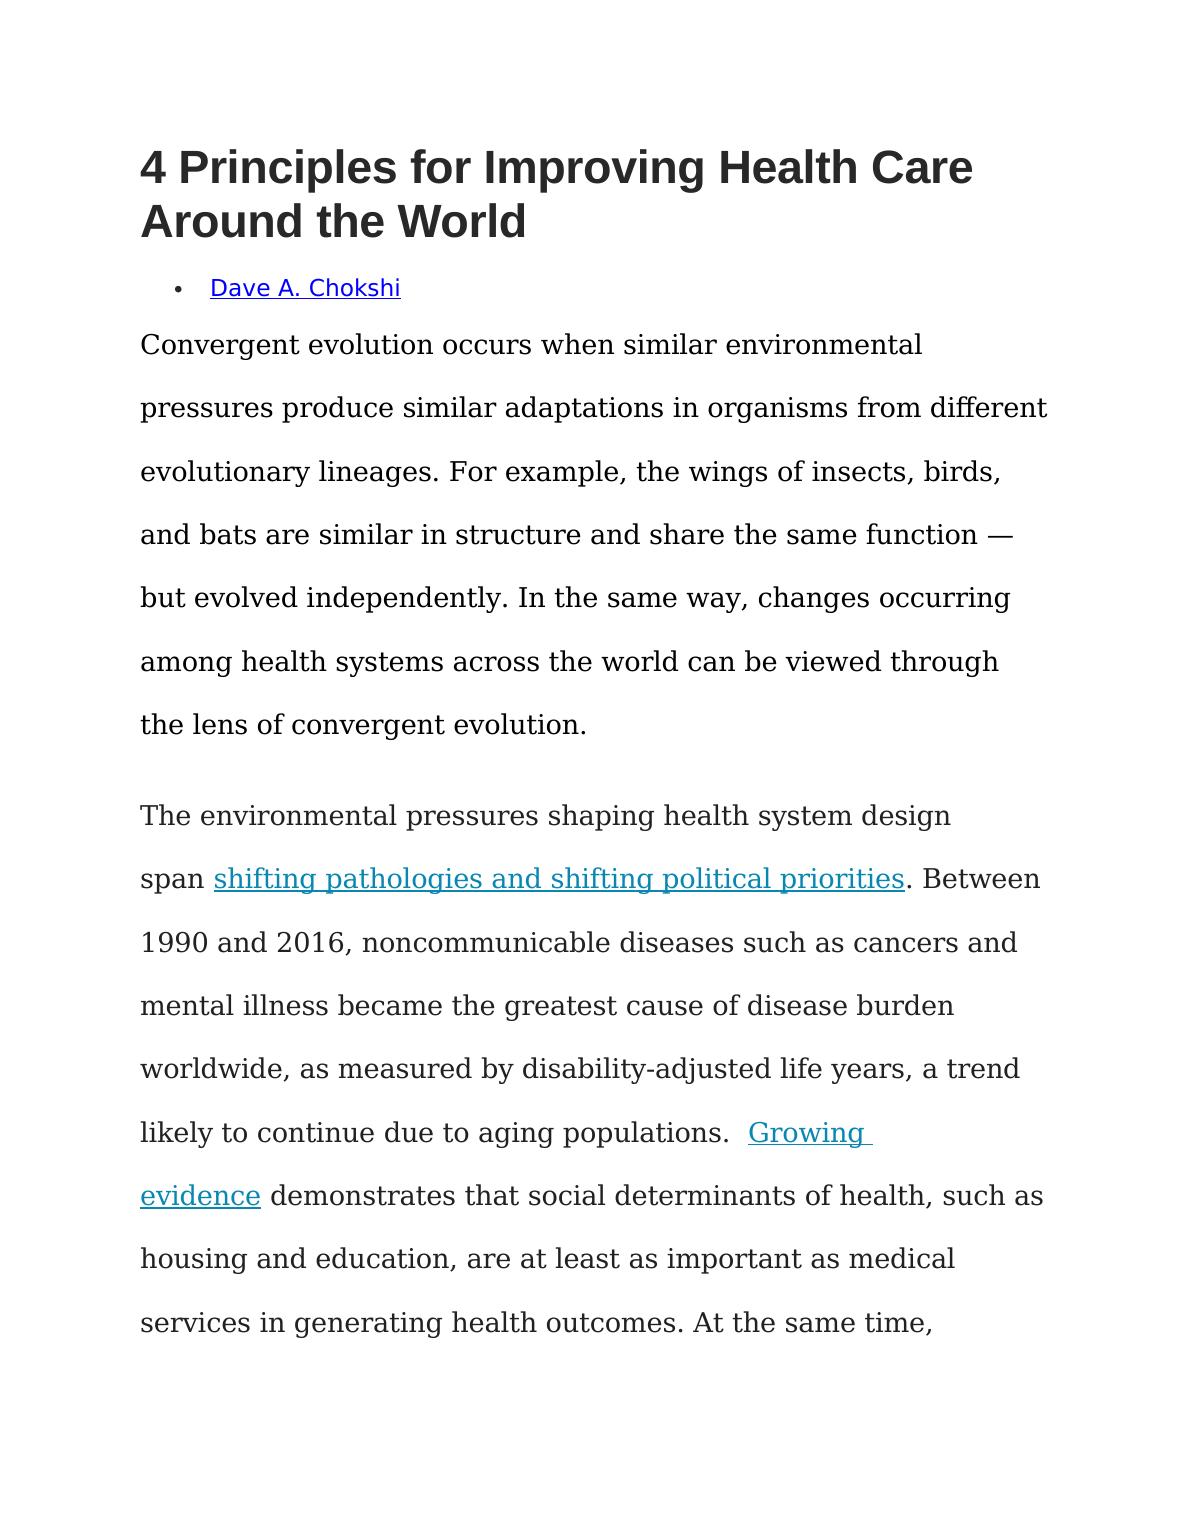 4  Principles for Improving Health Care Around the World_1